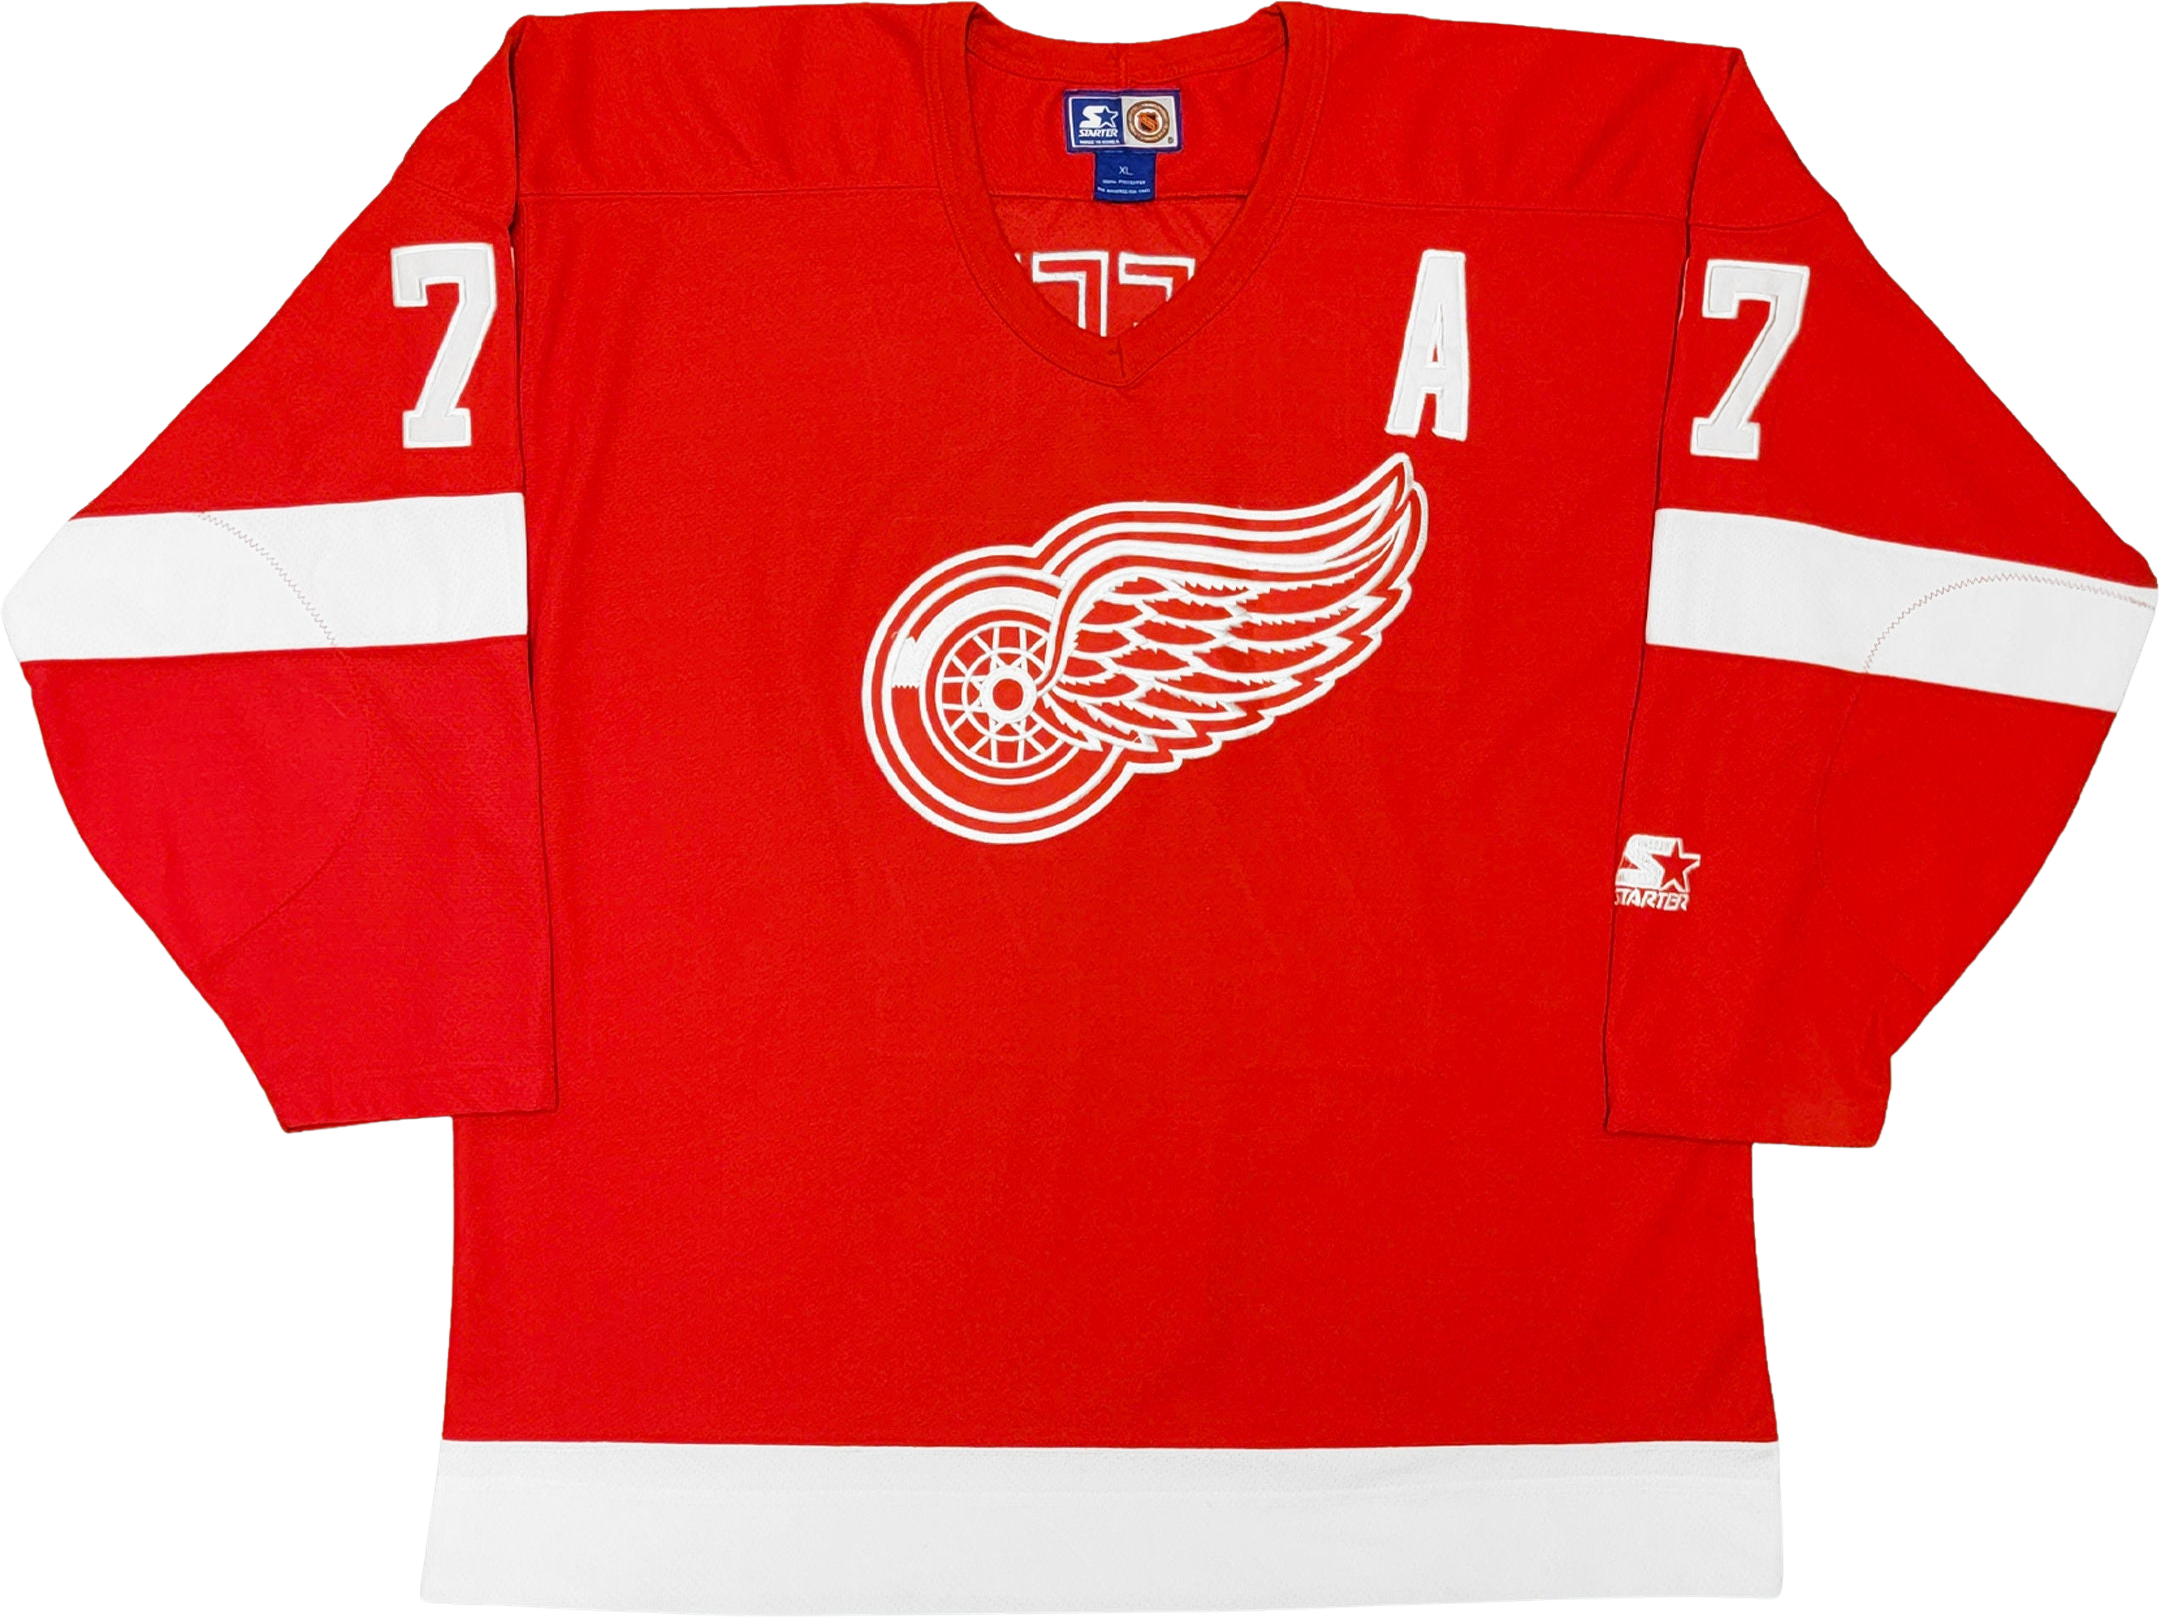 The troubling context around Tupac's infamous Red Wings jersey